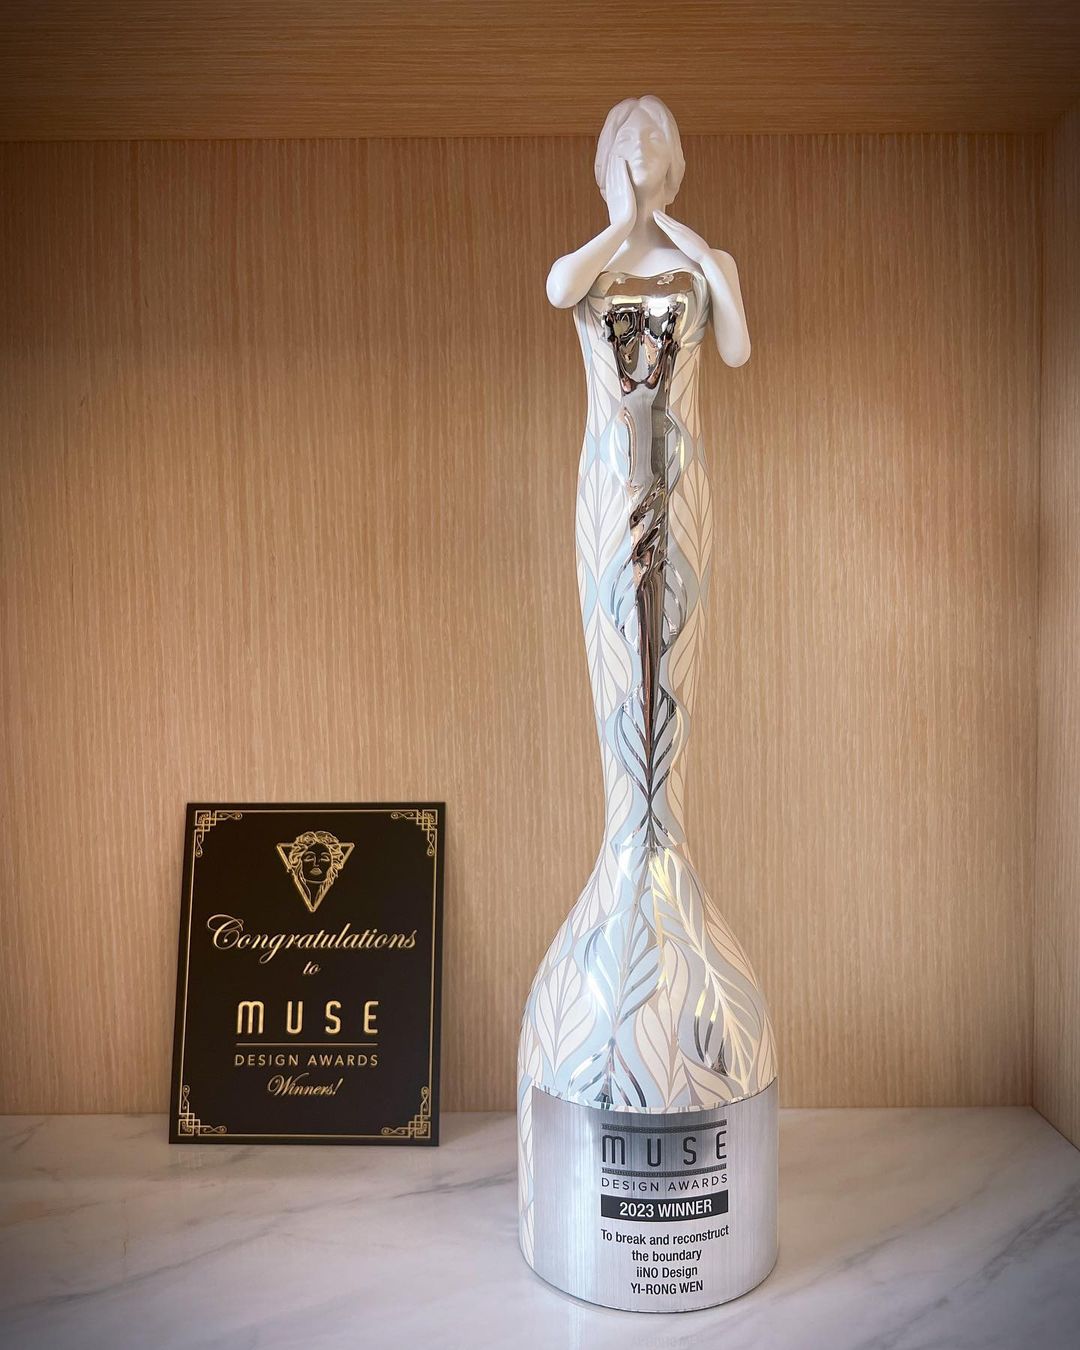 MUSE Design Awards Winner - Received the beauty goddess trophy and certificate! 